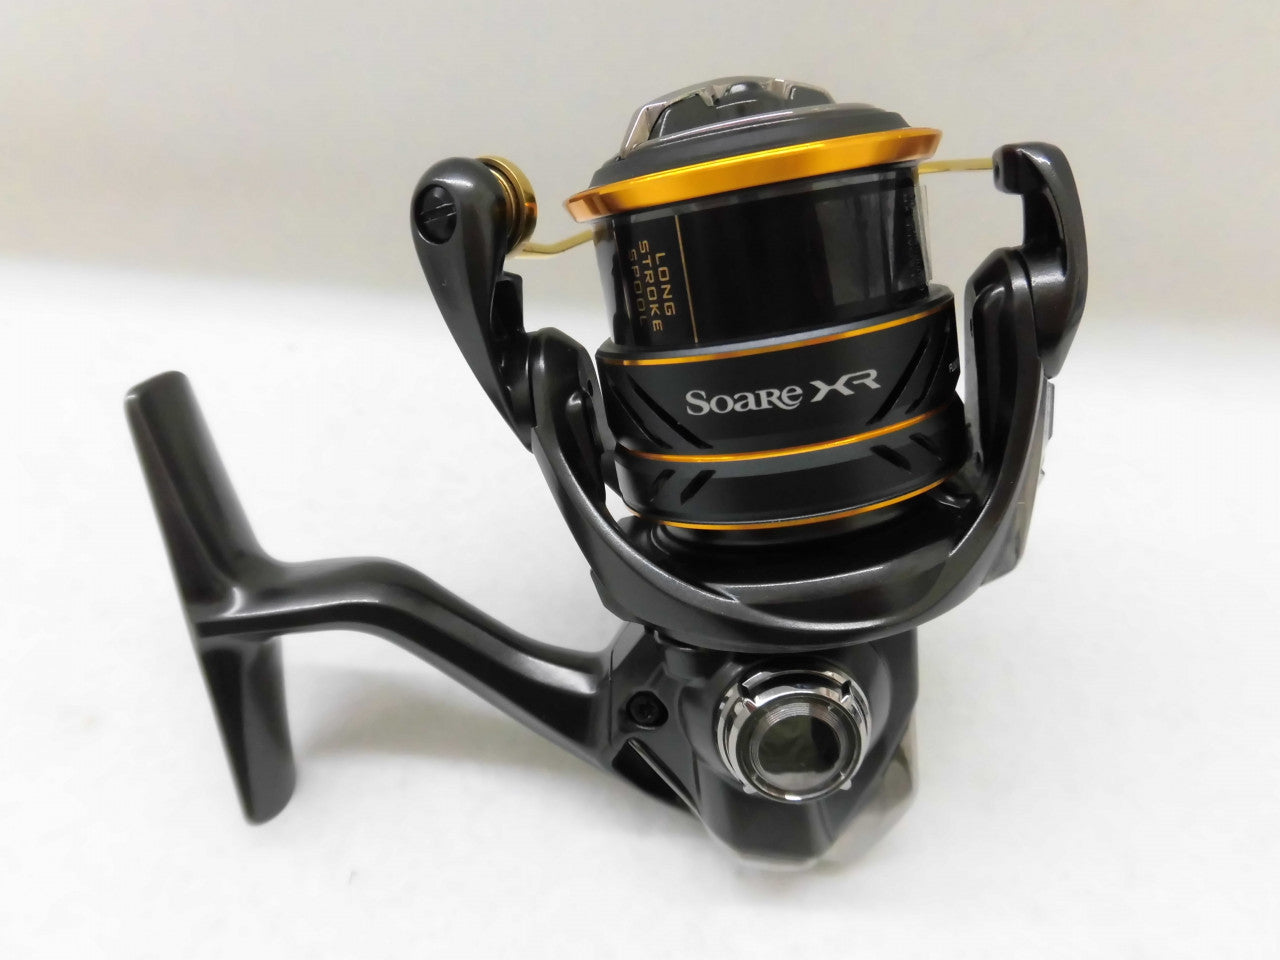 Shimano Soare XR C2000SSPG Spinning Reel Used – TRO Fishing service